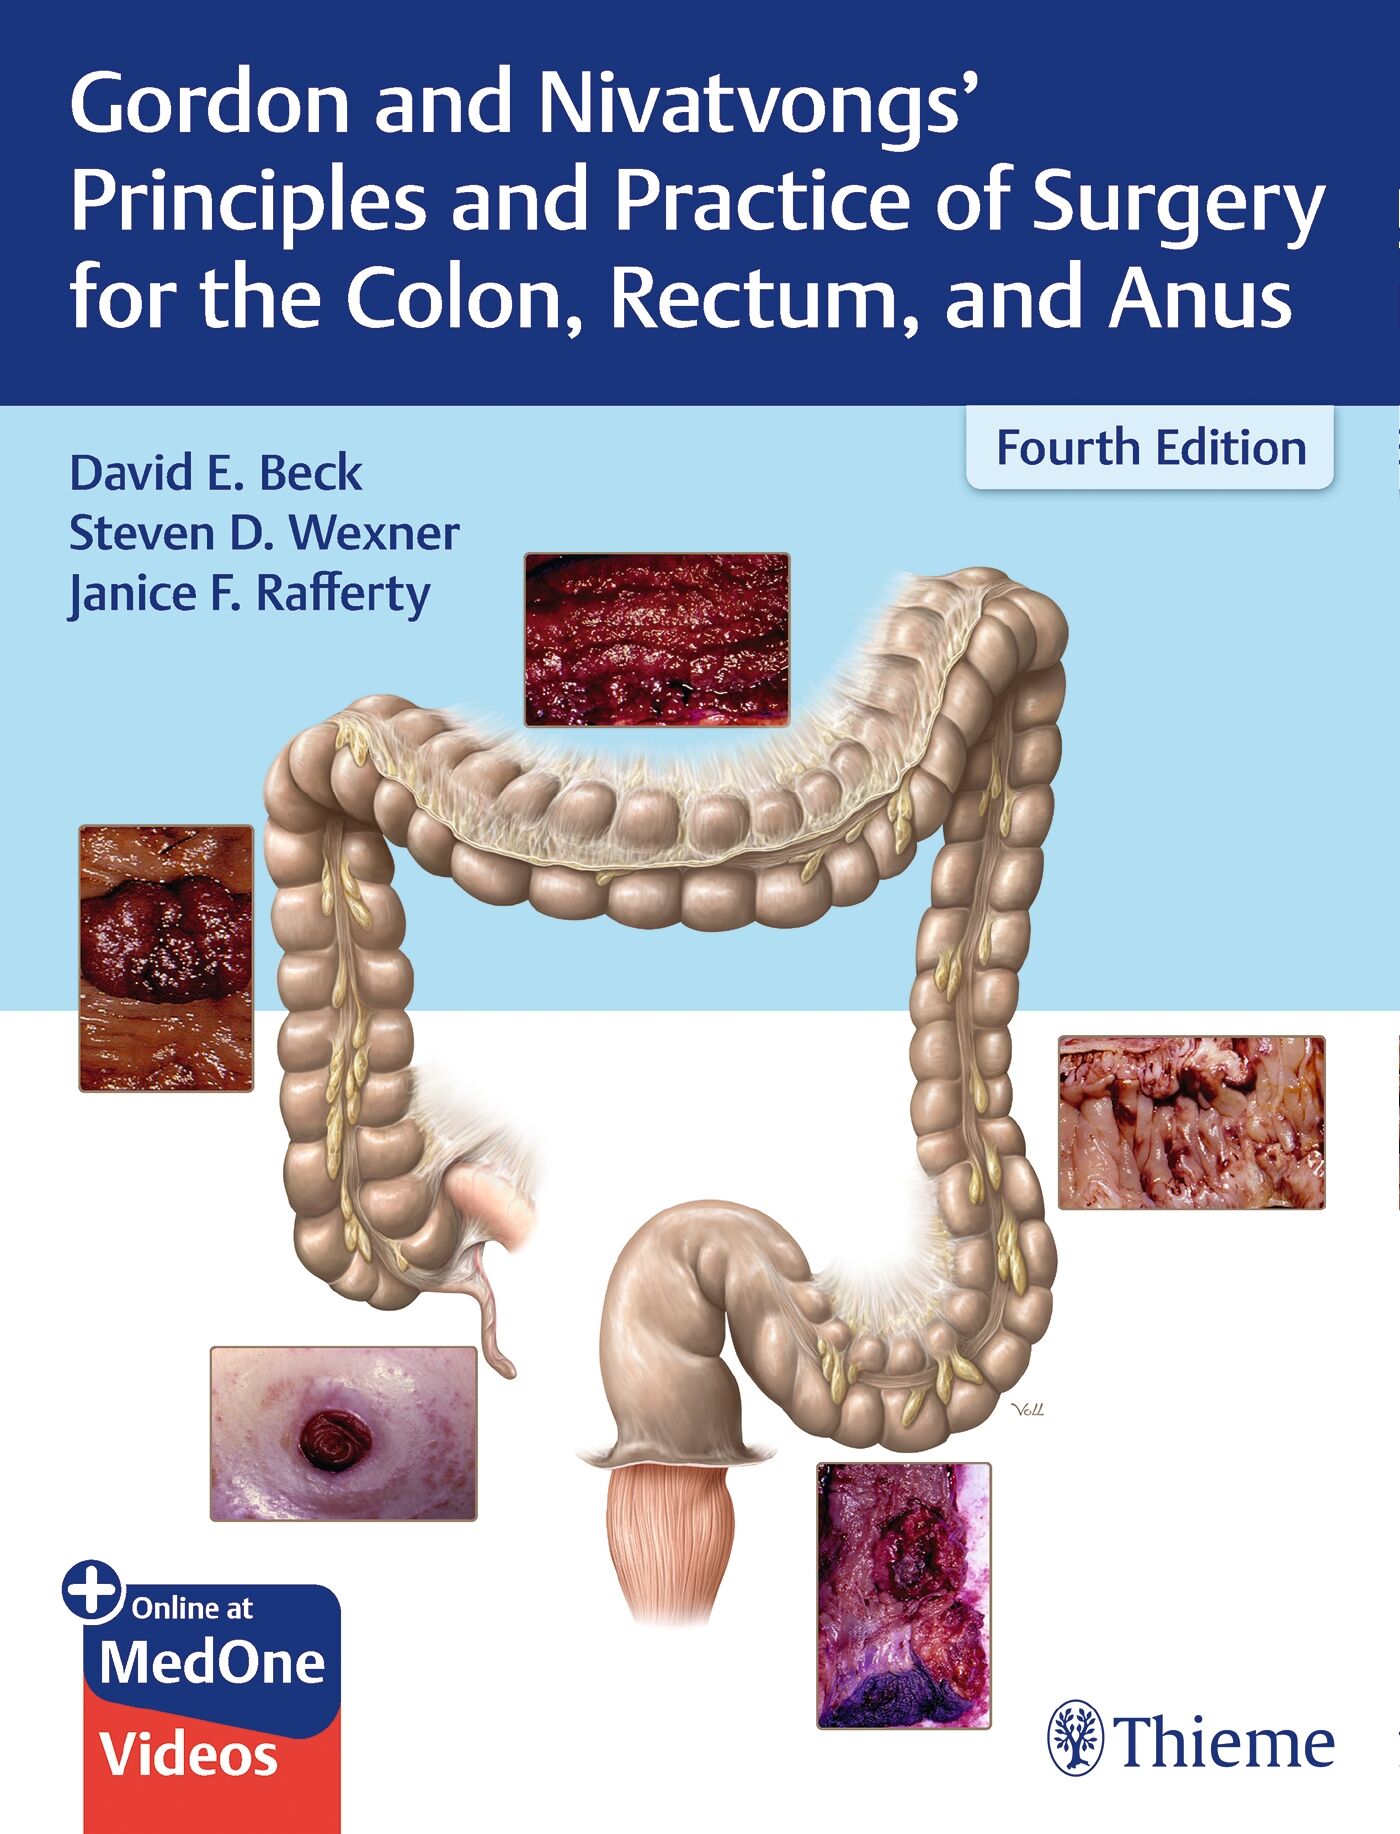 Gordon and Nivatvongs' Principles and Practice of Surgery for the Colon, Rectum, and Anus, 9781626234291